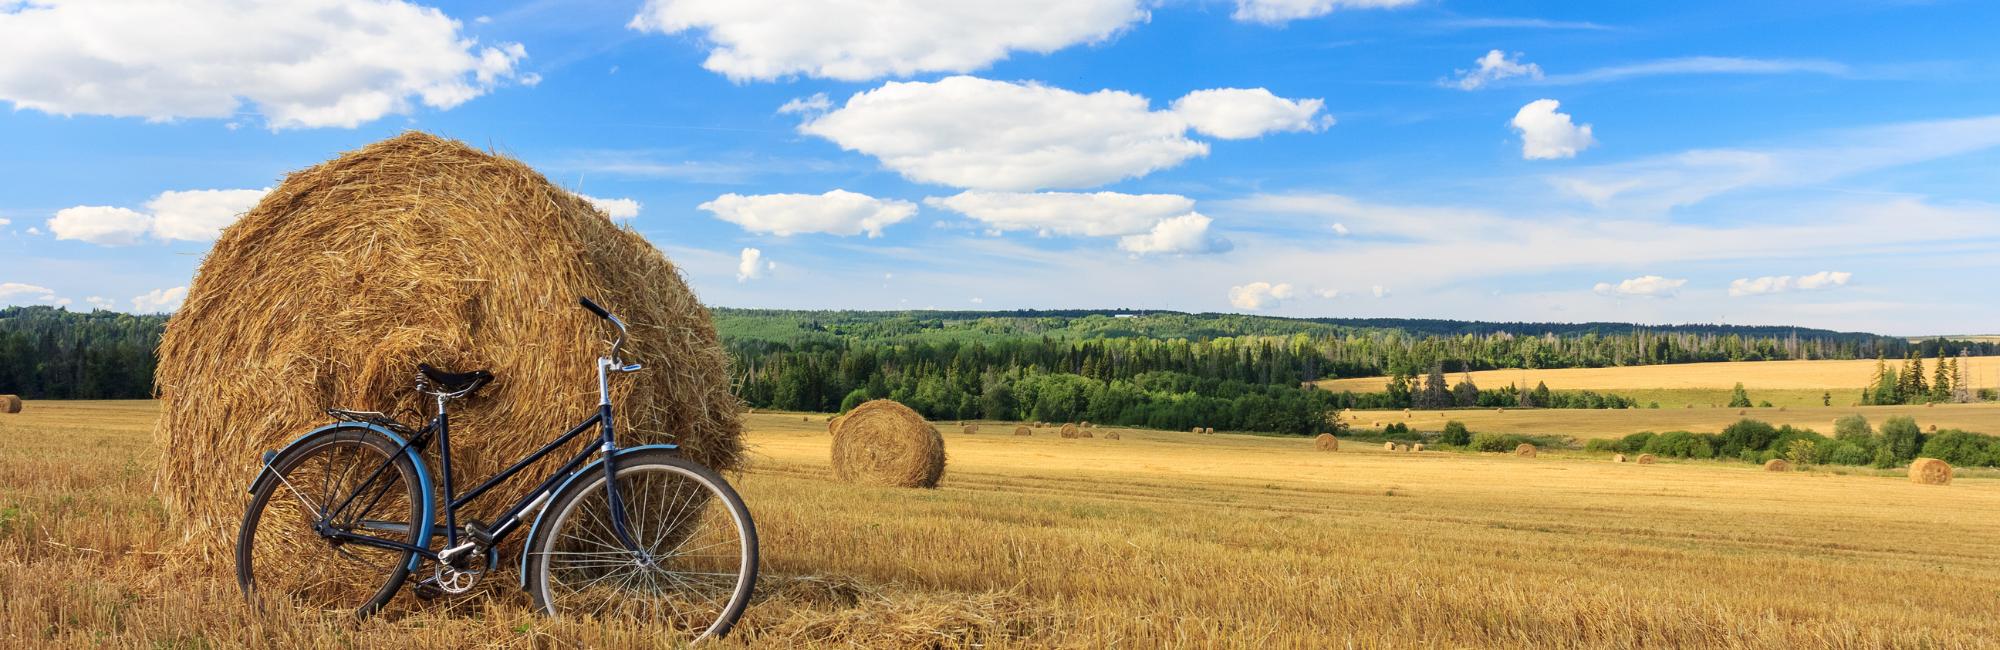 cereal field and bicycle